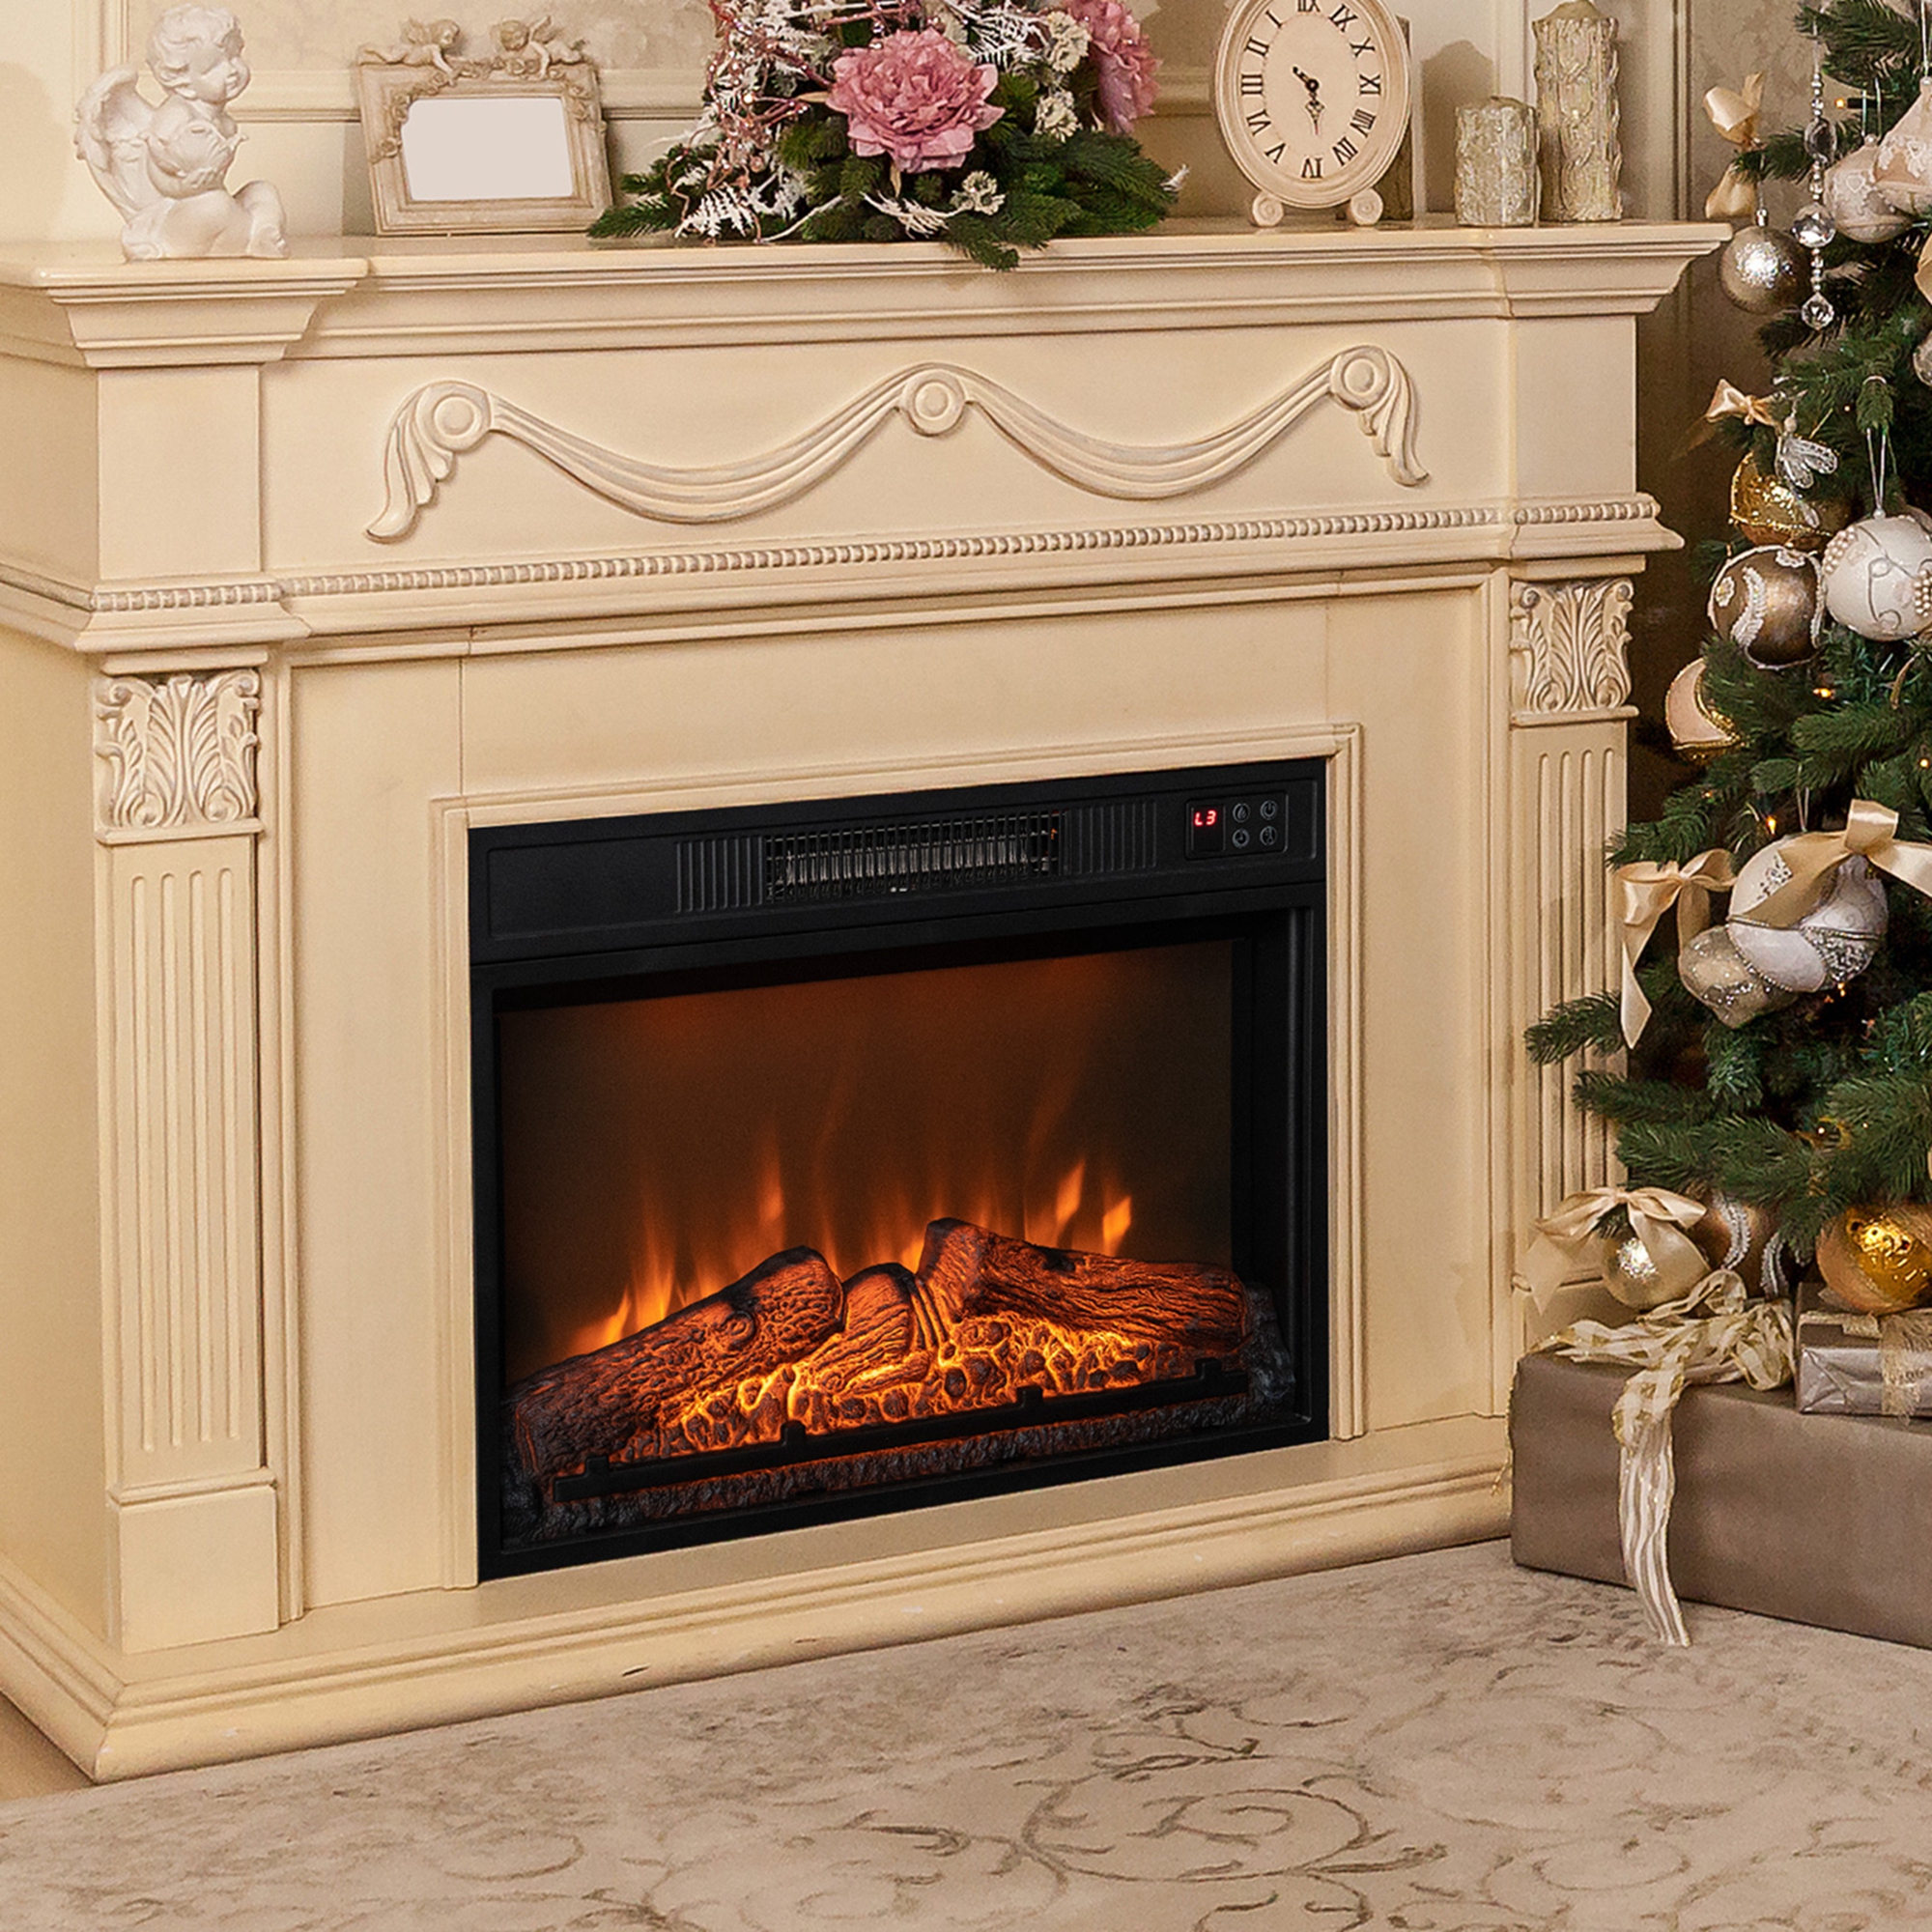 Costway 23" Electric Fireplace Insert Heater w/ Log Flame Effects Remote Control 1400W